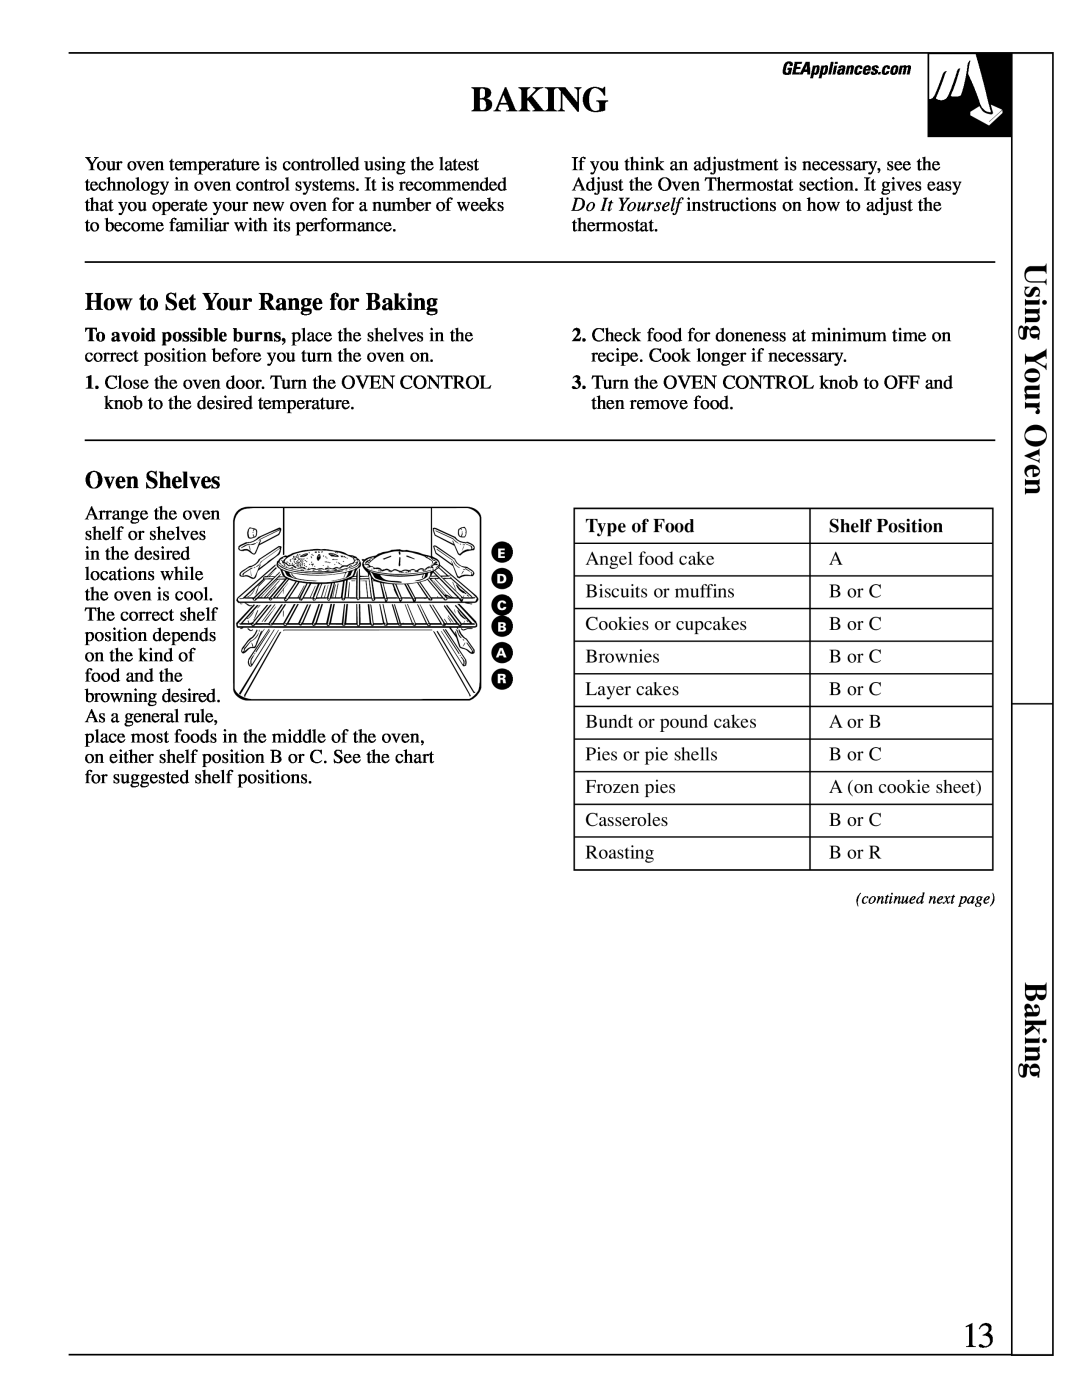 GE XL44 manual How to Set Your Range for Baking, Using Your Oven, Oven Shelves, Type of Food, Shelf Position 